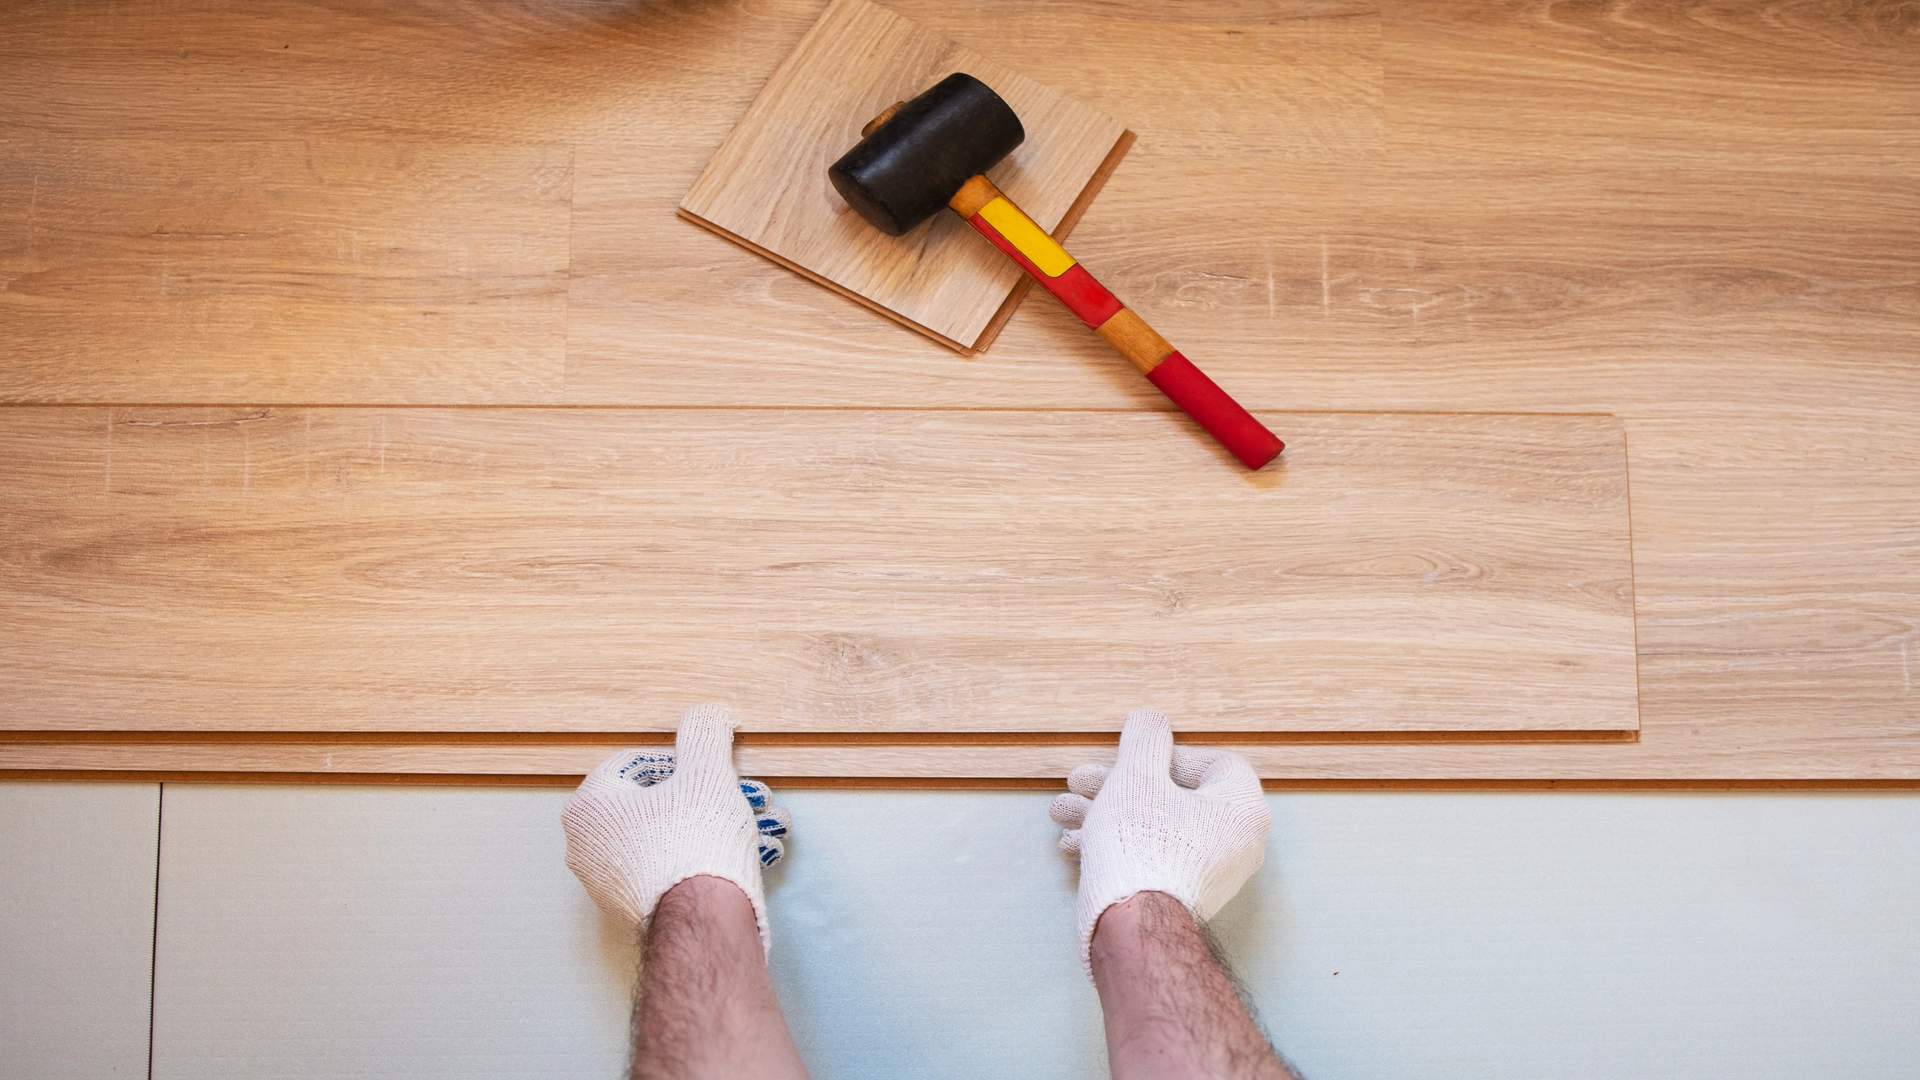 Hands with a hammer installing tiles on a floor as Basement Flooring Options